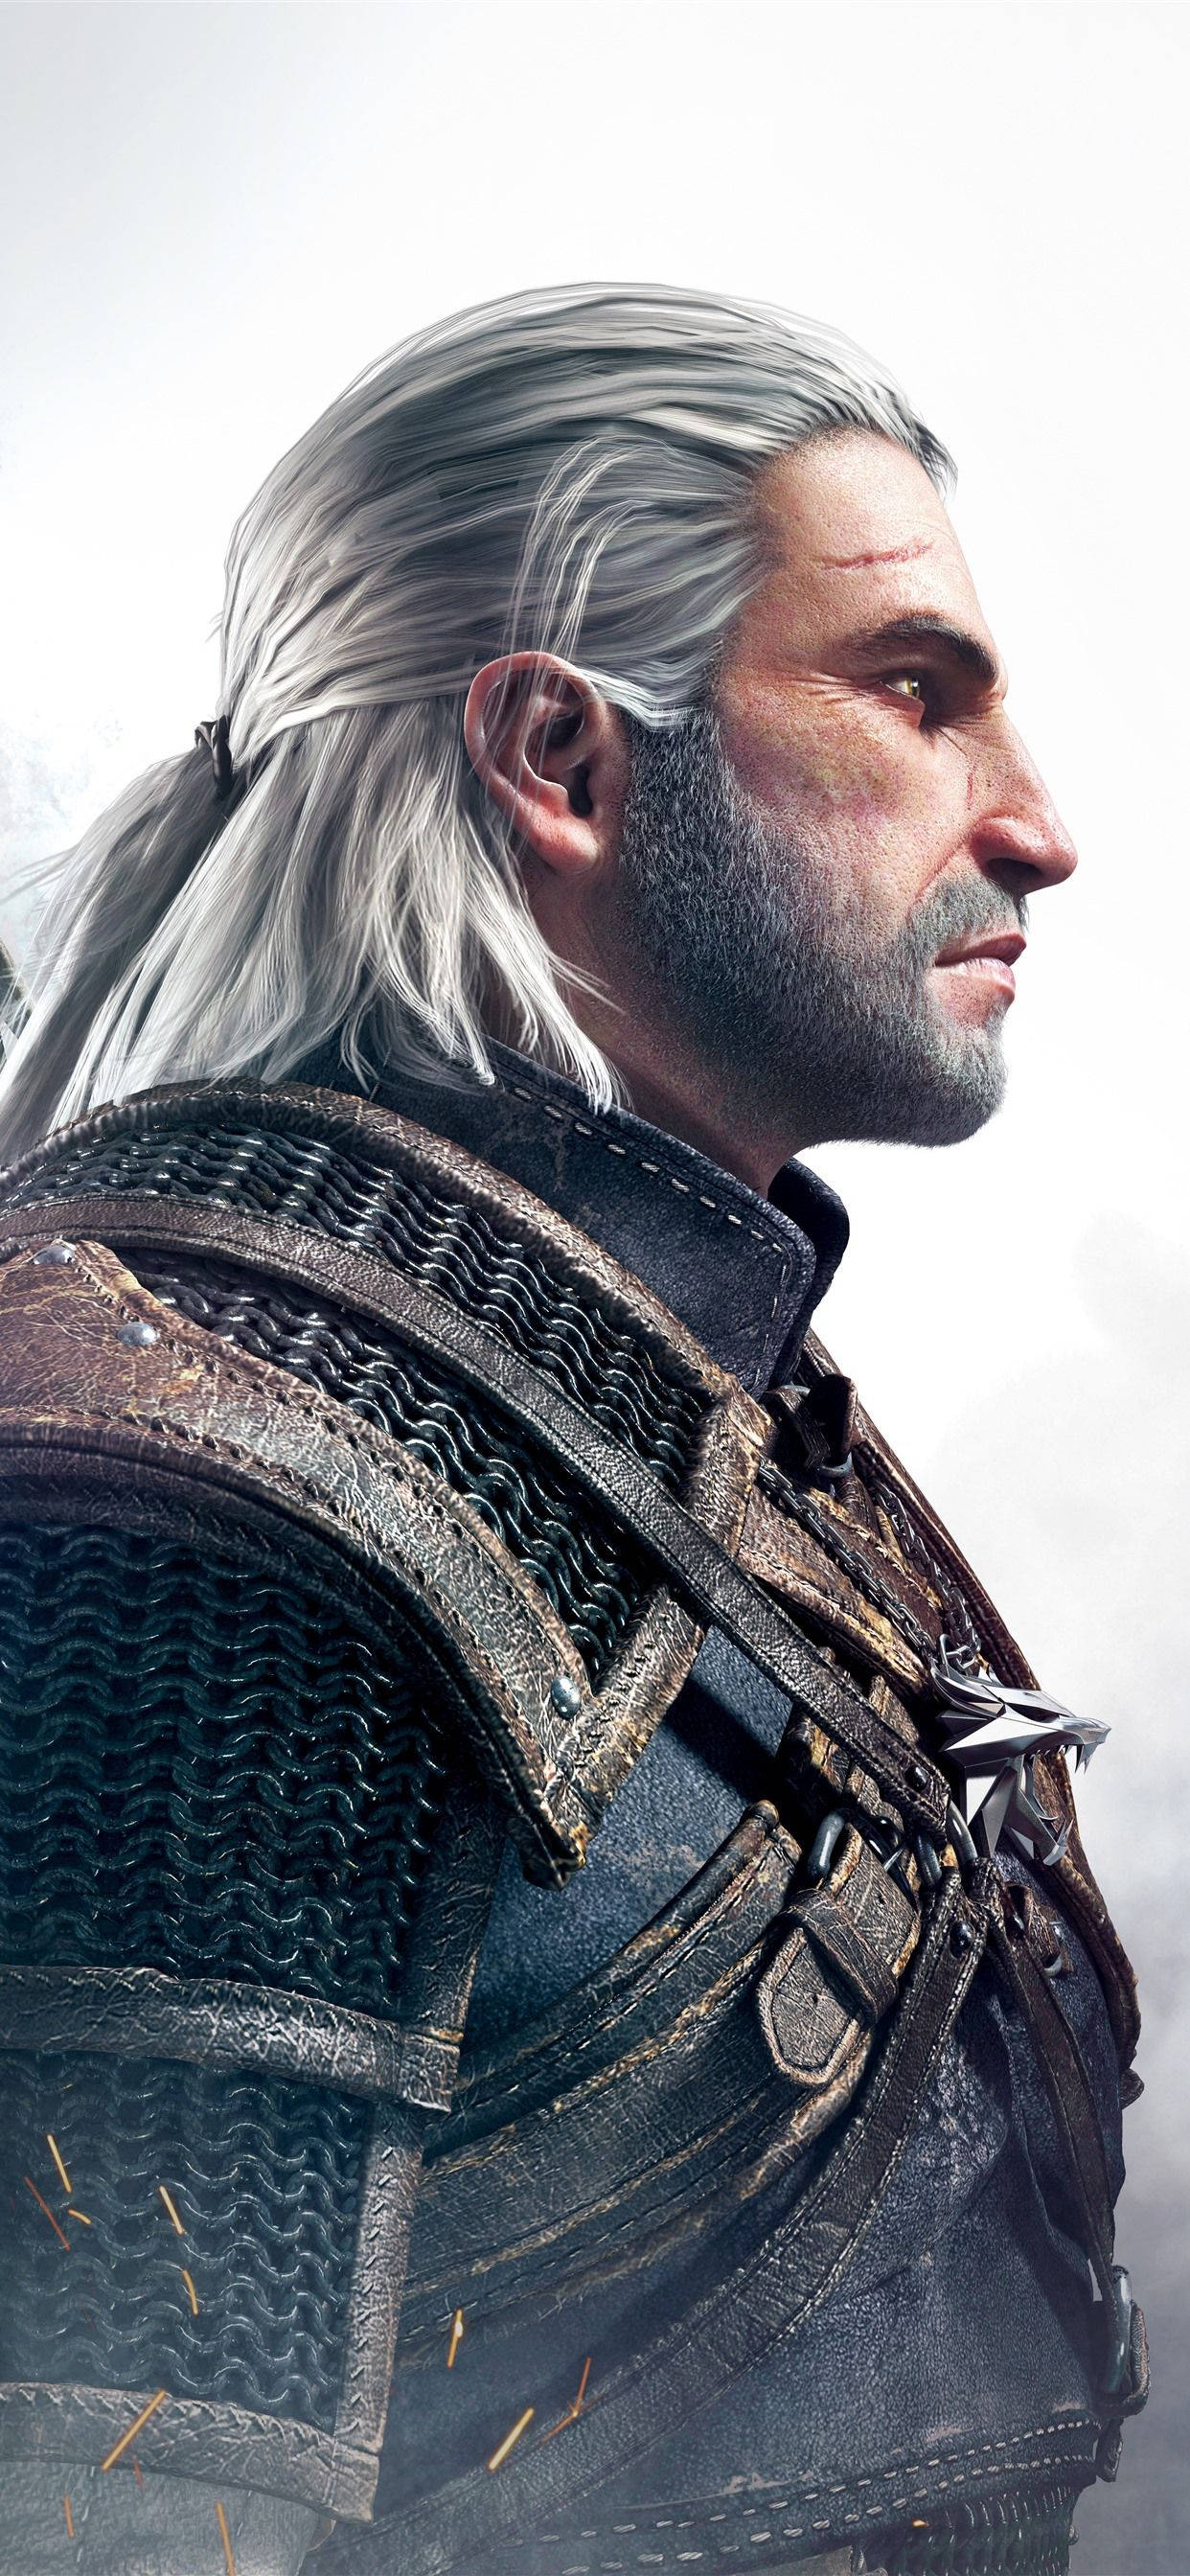 Geralt Side Profile Witcher 3 Iphone Background